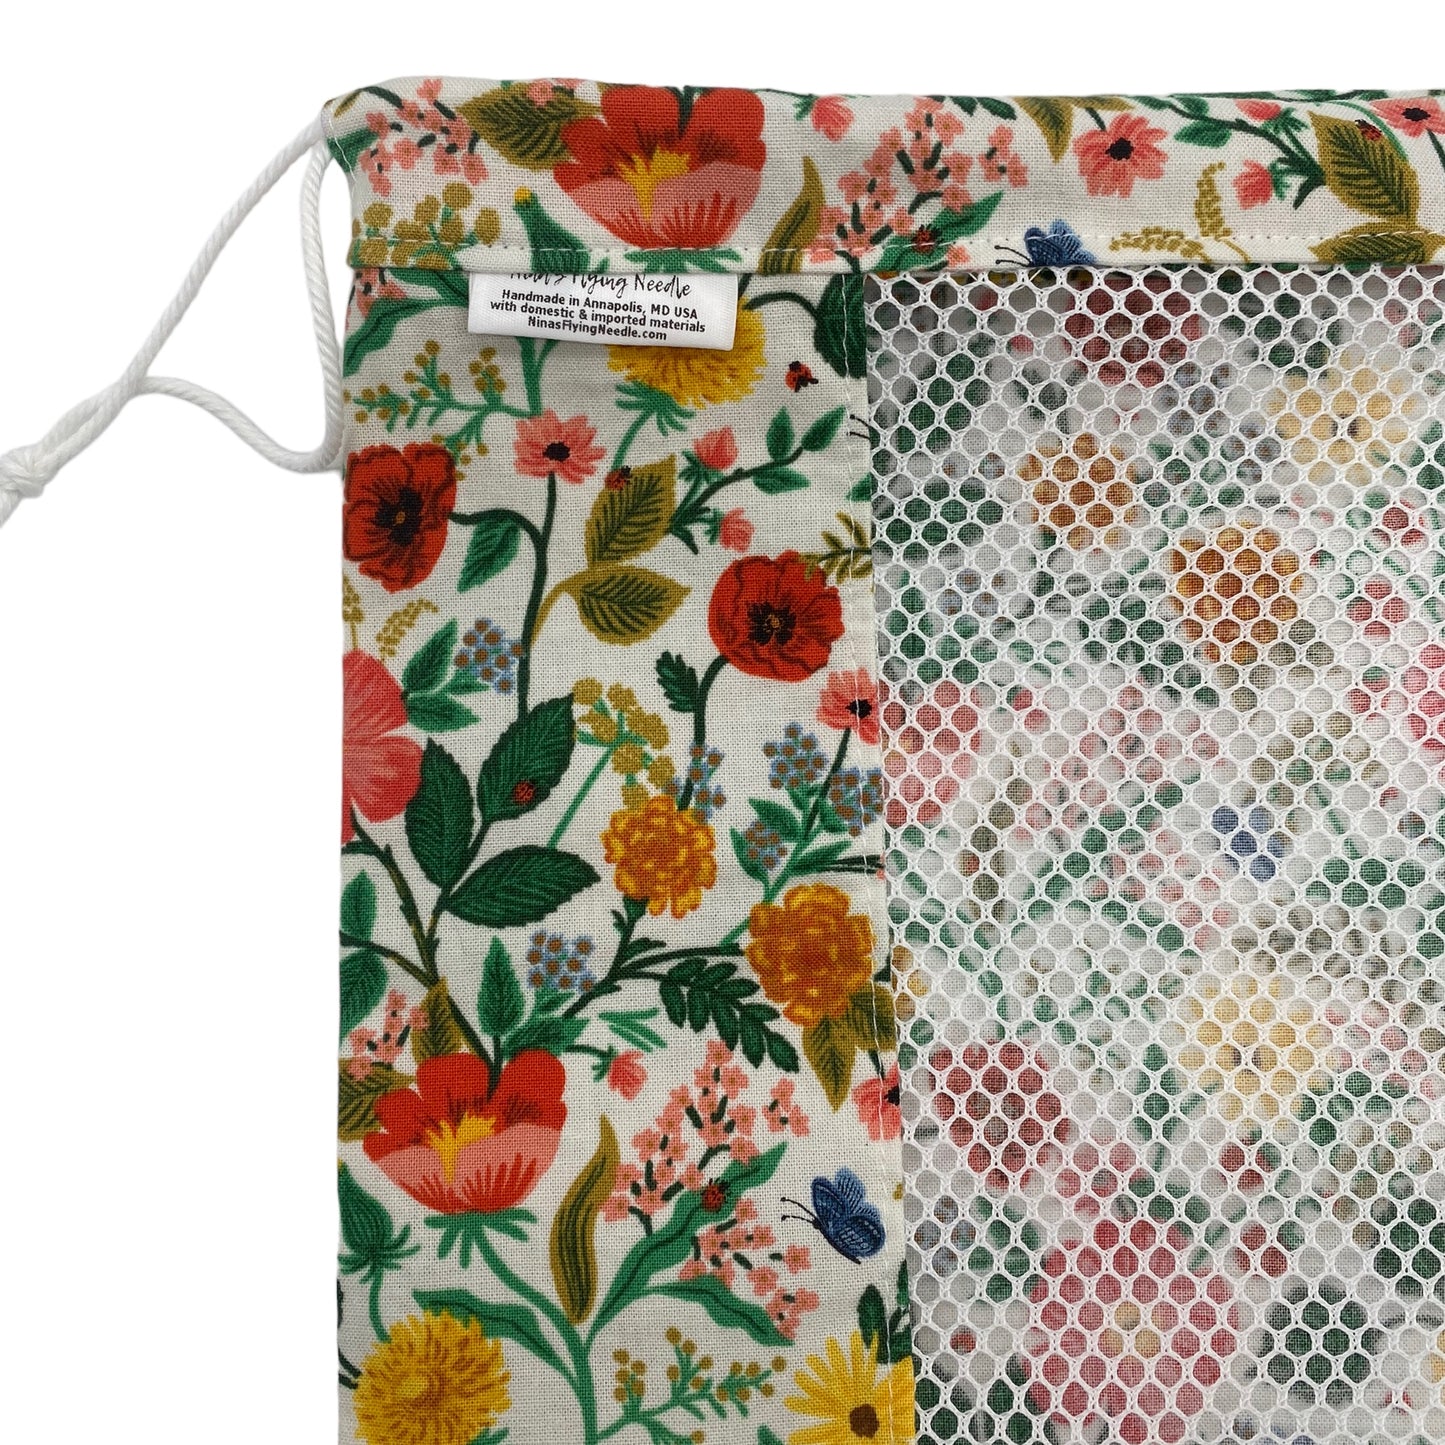 Medium Produce Bag Florals with Butterflies and Ladybugs